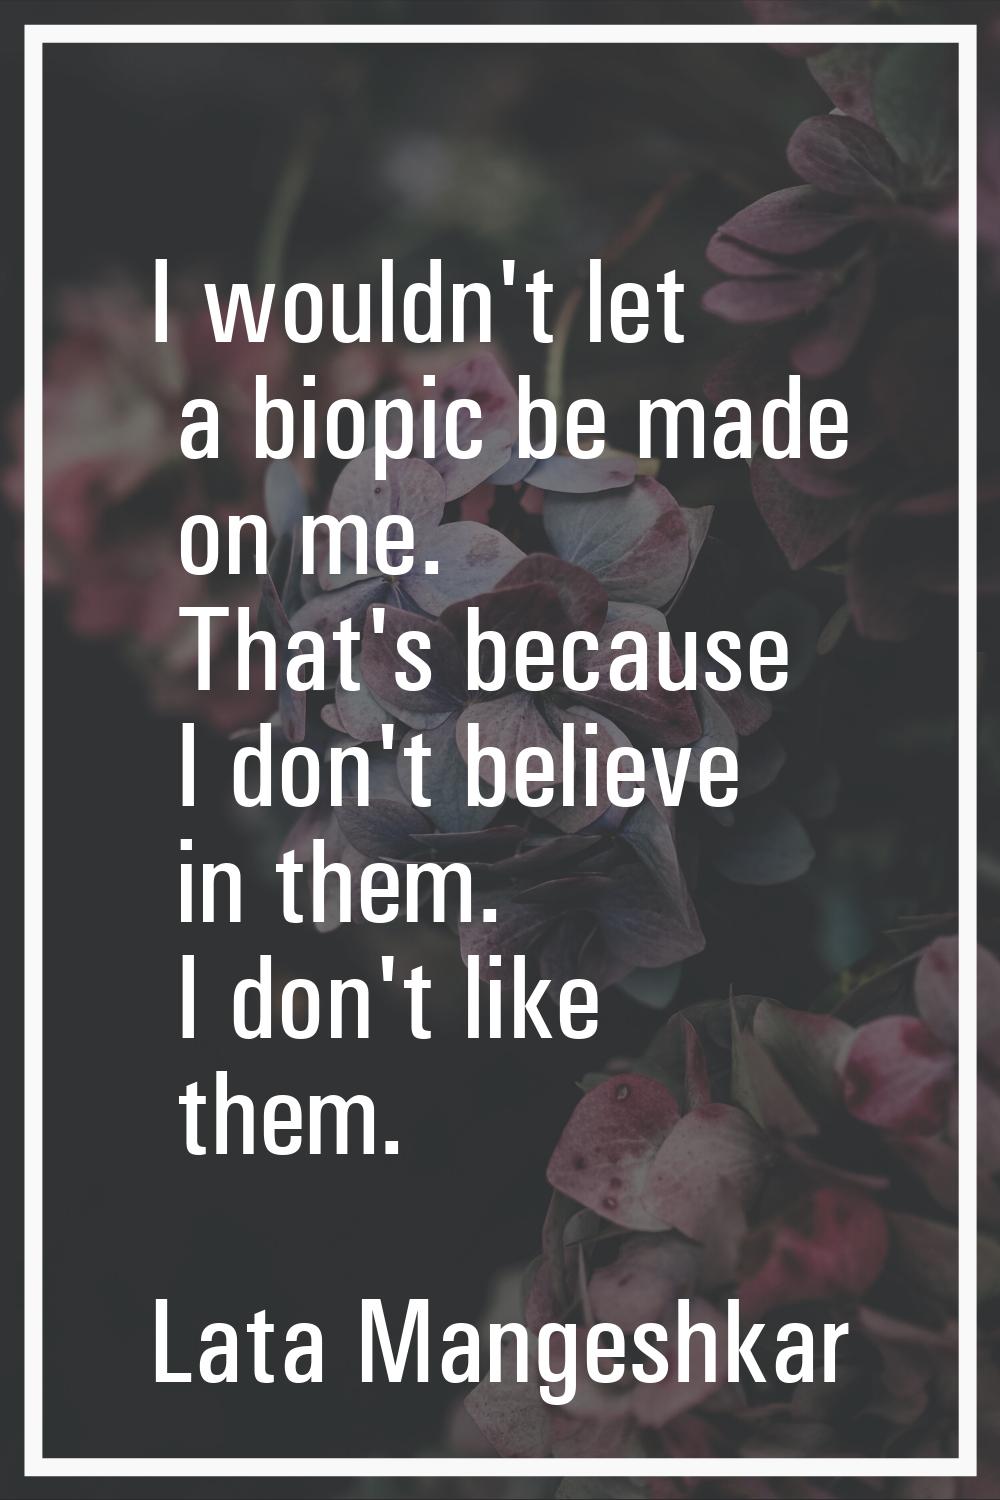 I wouldn't let a biopic be made on me. That's because I don't believe in them. I don't like them.